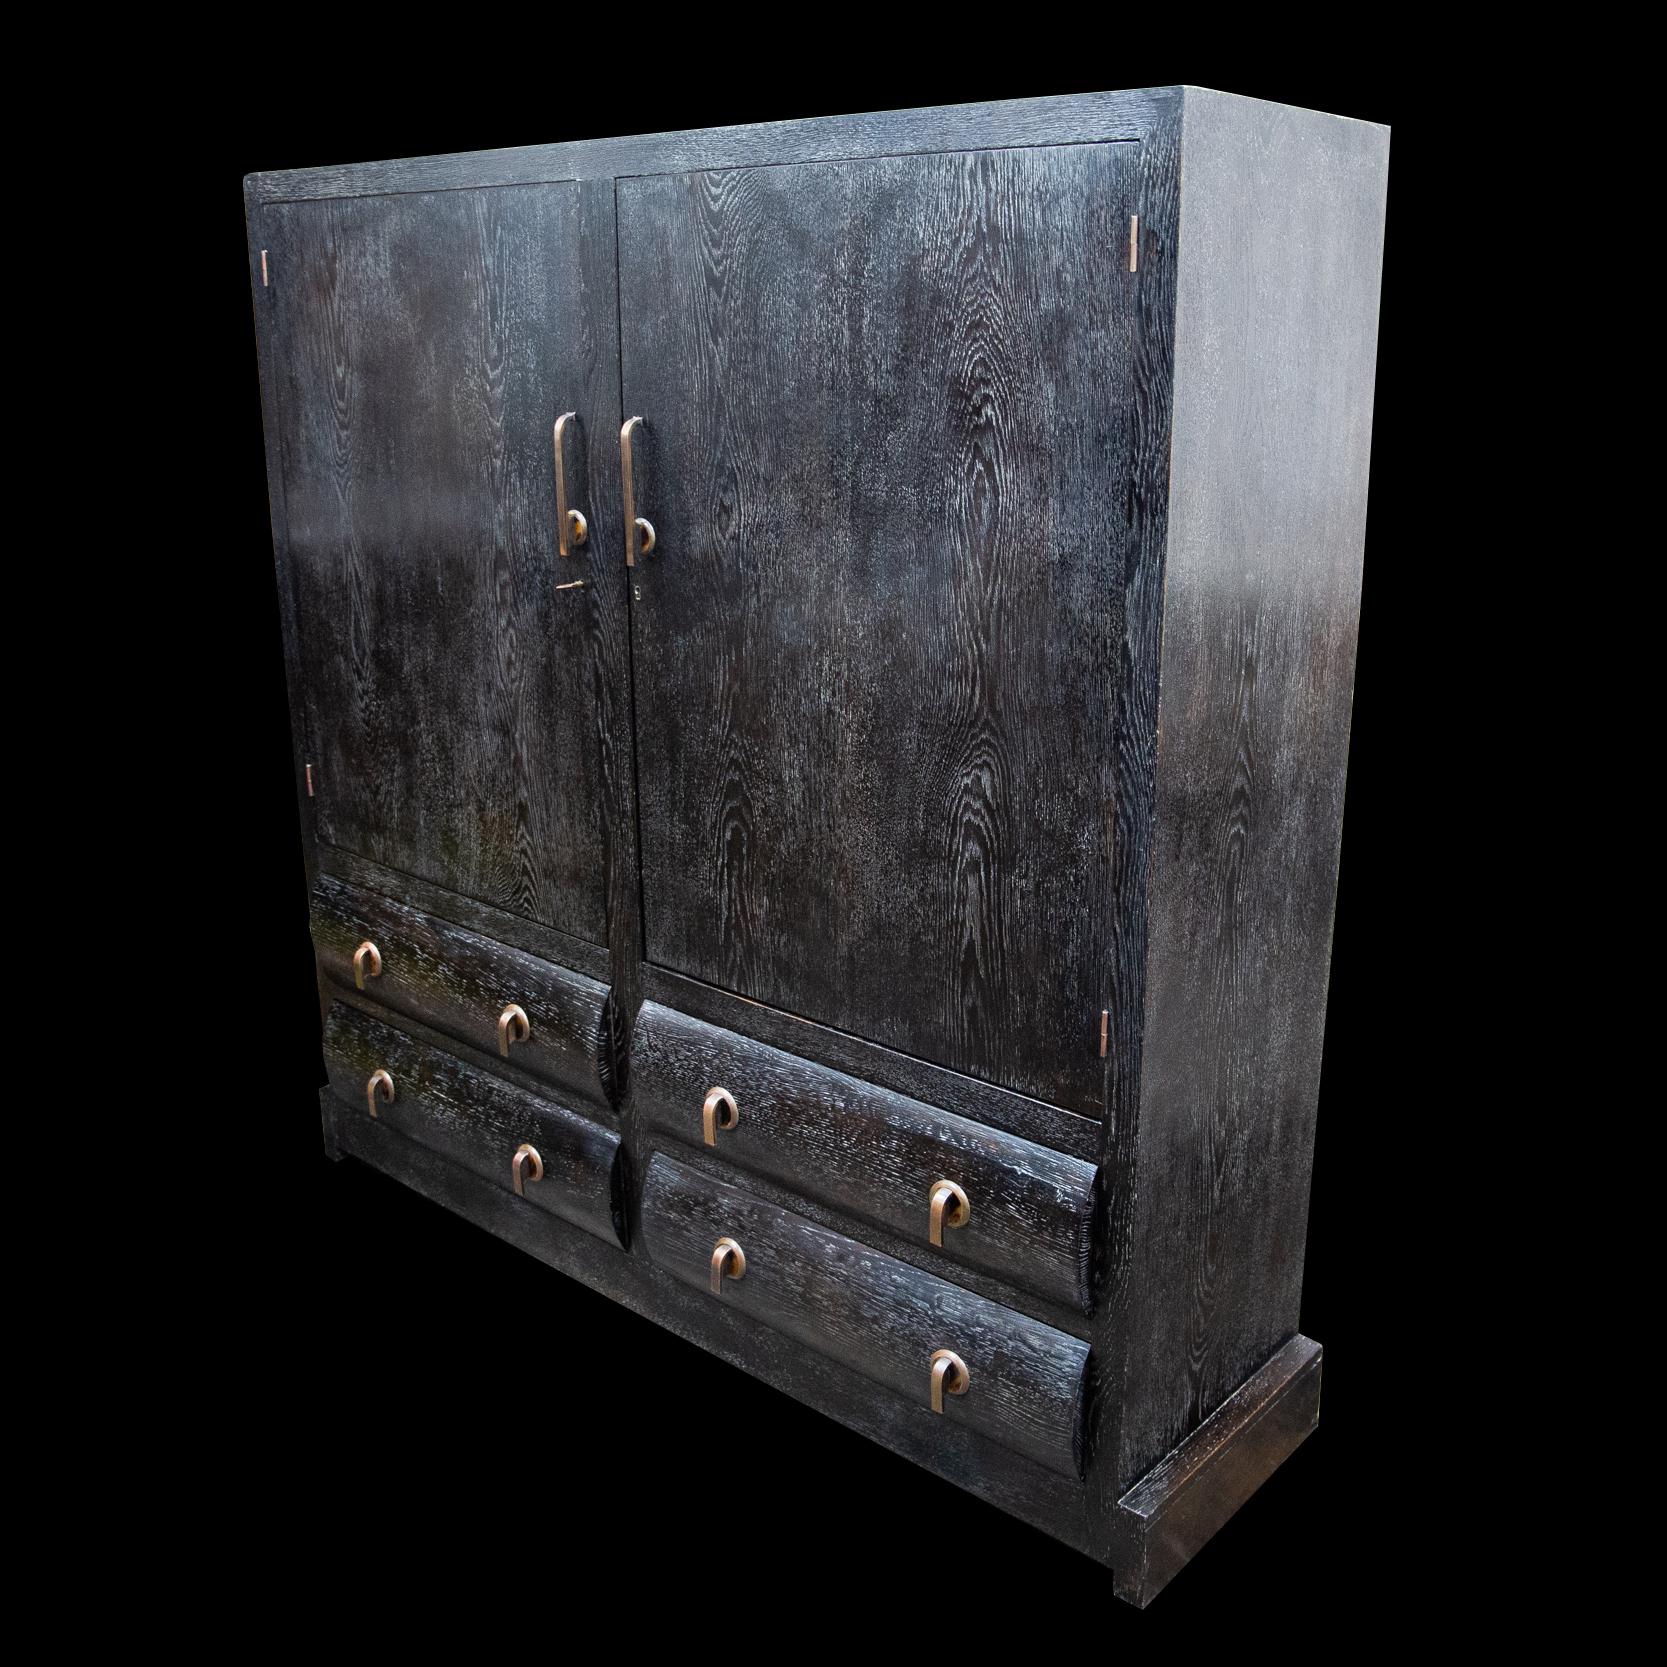 An important beautifully made brushed oak cabinet with superb original and unusual bronze ornamentation with inlaid faux tortoiseshell. Almost certainly a commissioned unique piece of the period. The top main section comprised of two large lockable